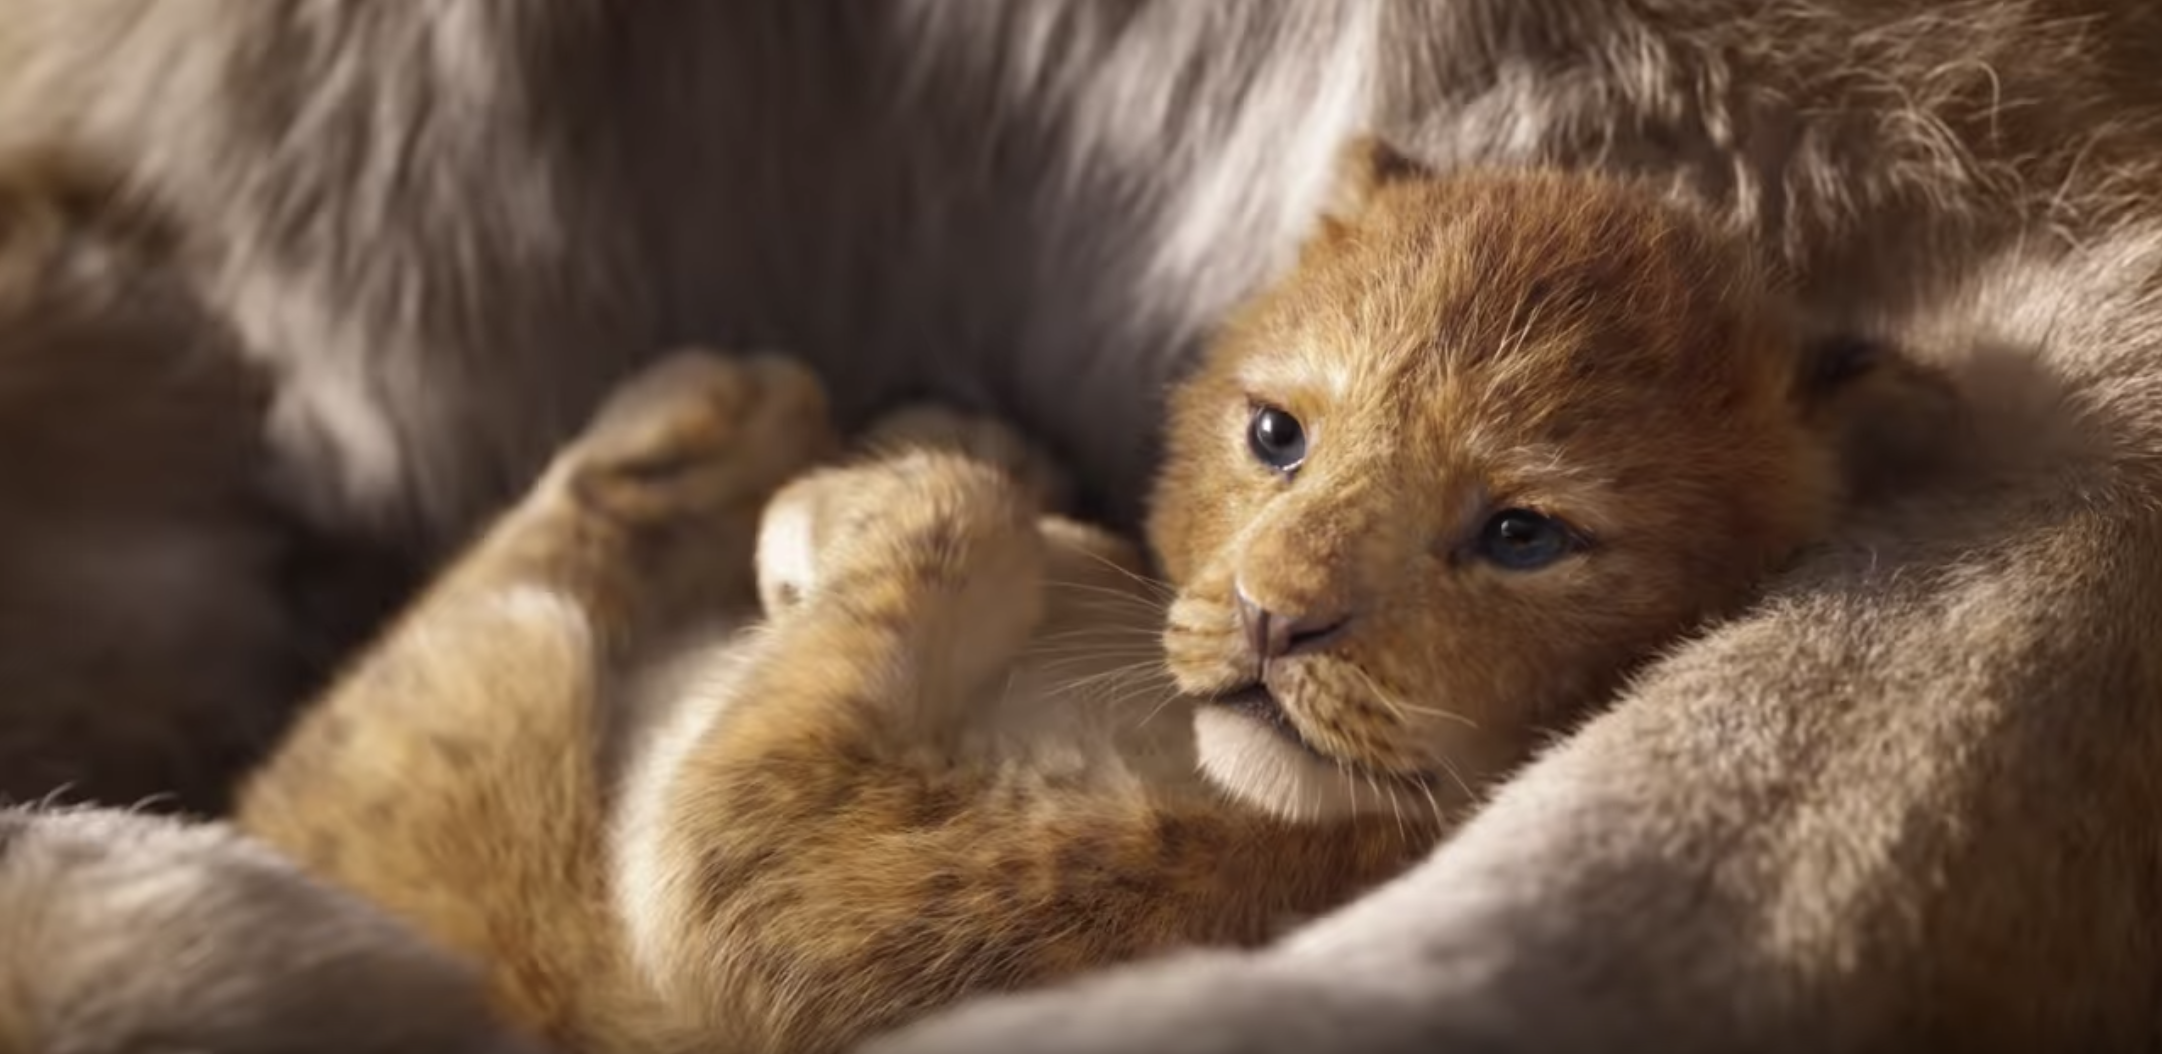 Simba, a baby lion, rendered in 3D